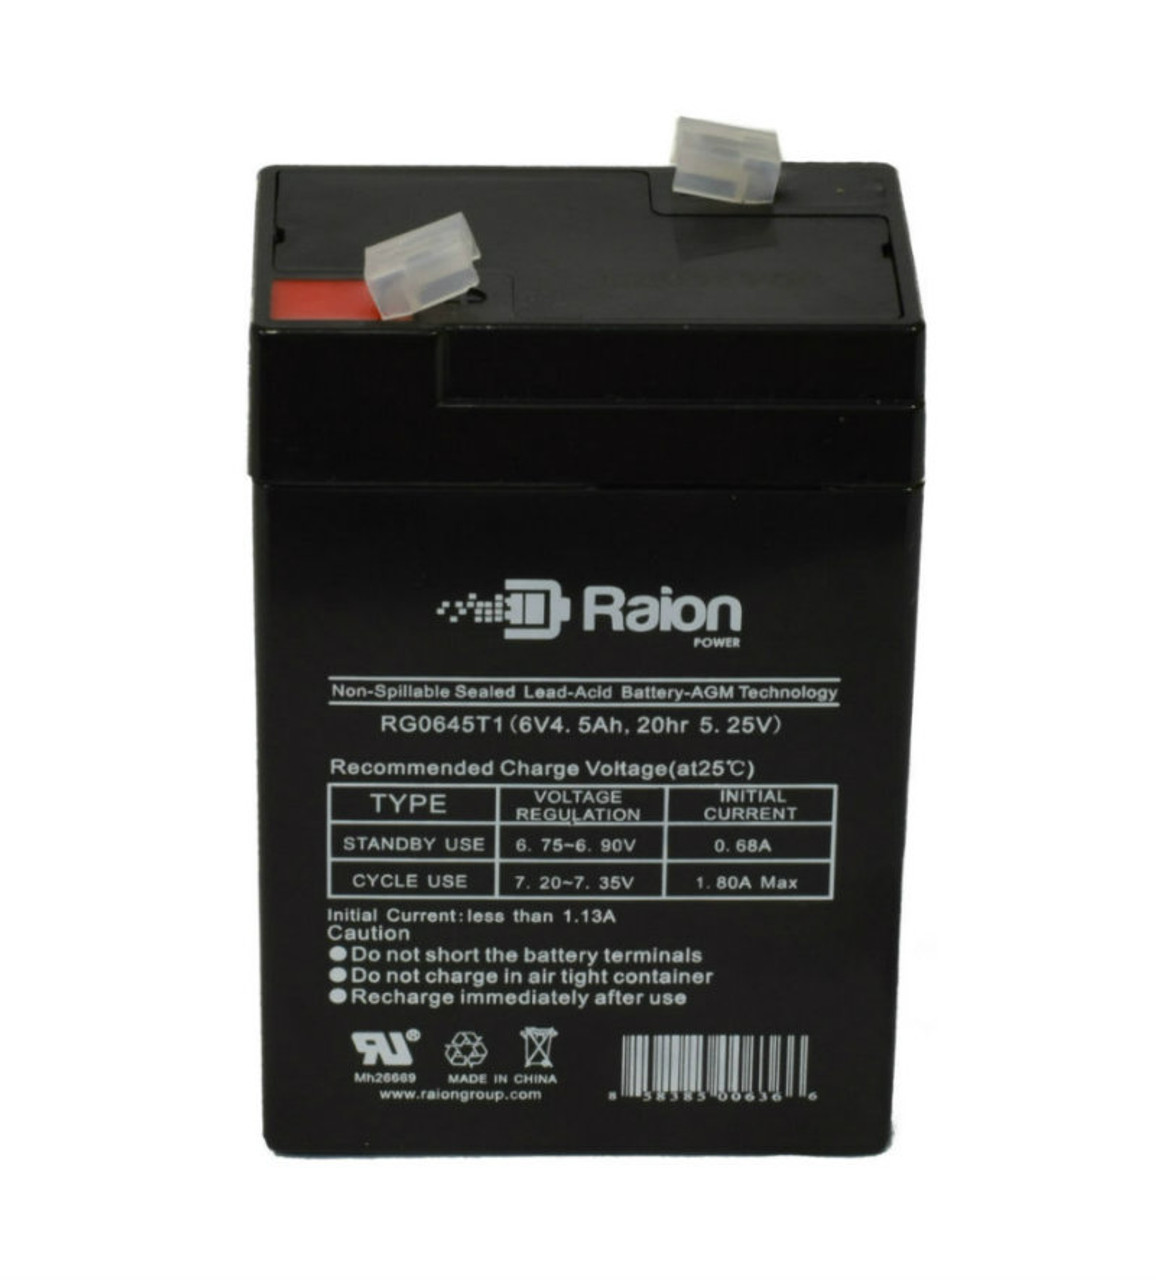 Raion Power RG0645T1 Replacement Battery Cartridge for Peg Perego IGED10831 6V Choo Choo Express